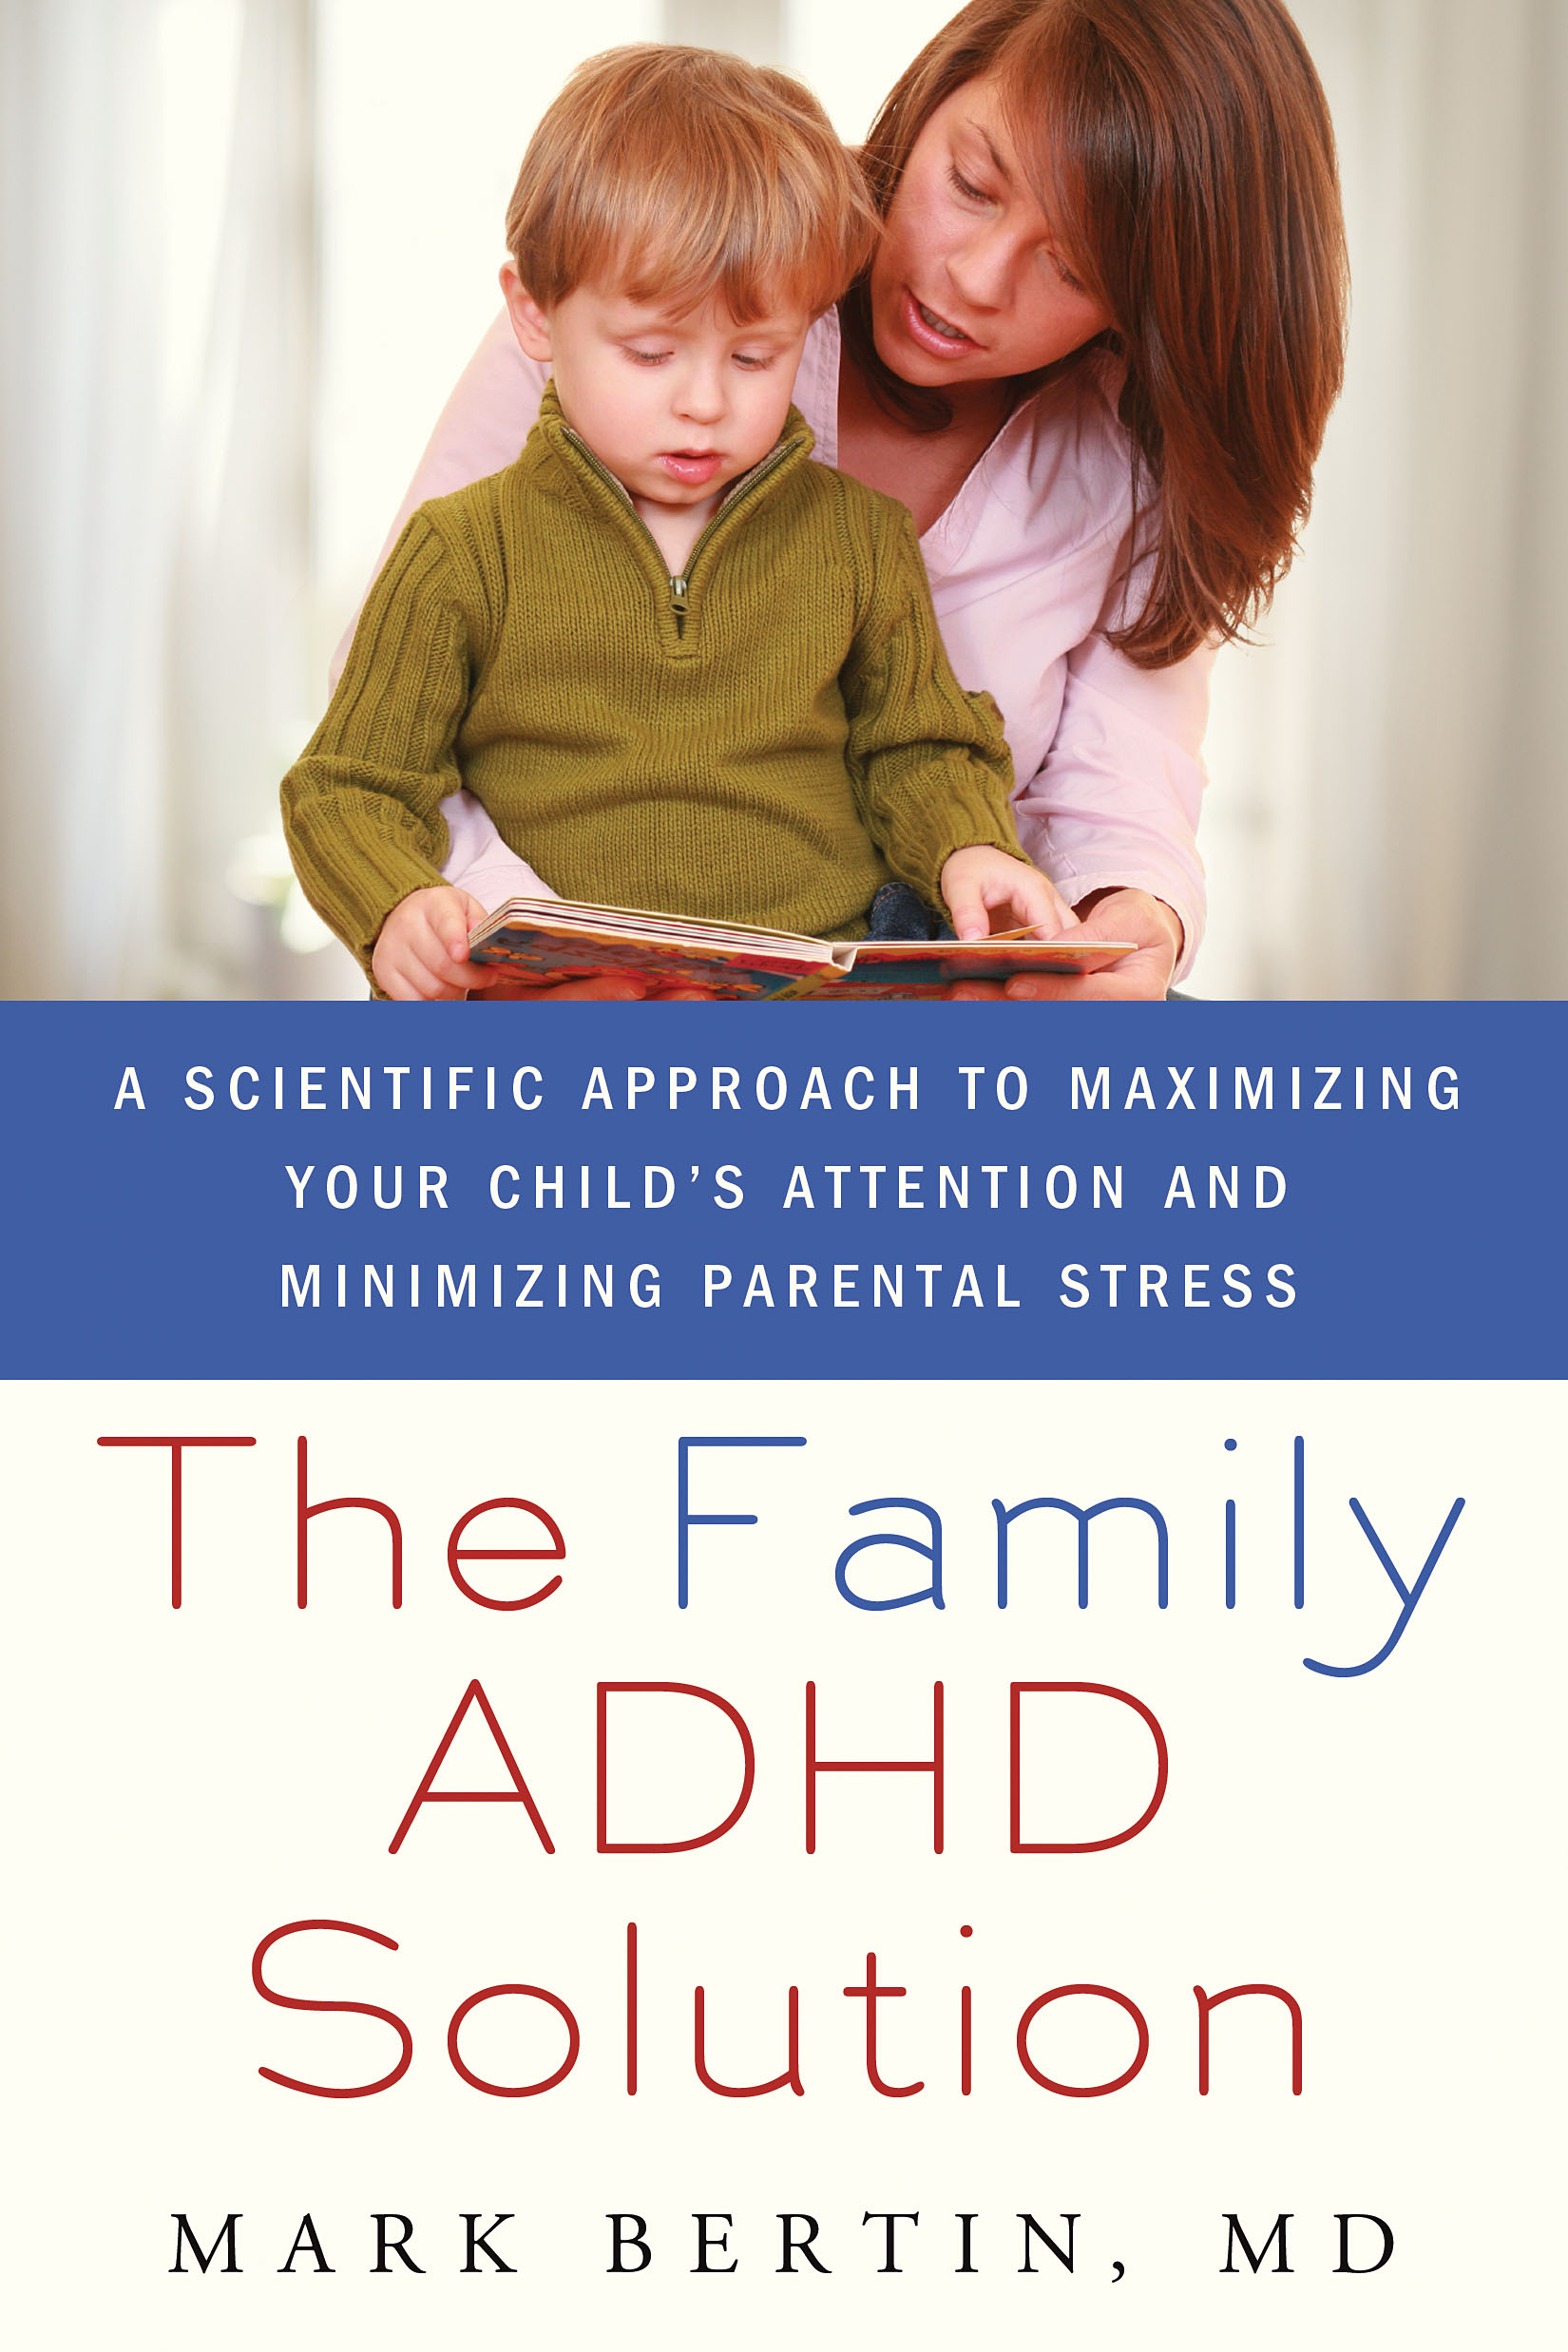 "The Family ADHD Solution" by Mark Bertin, MD book cover.